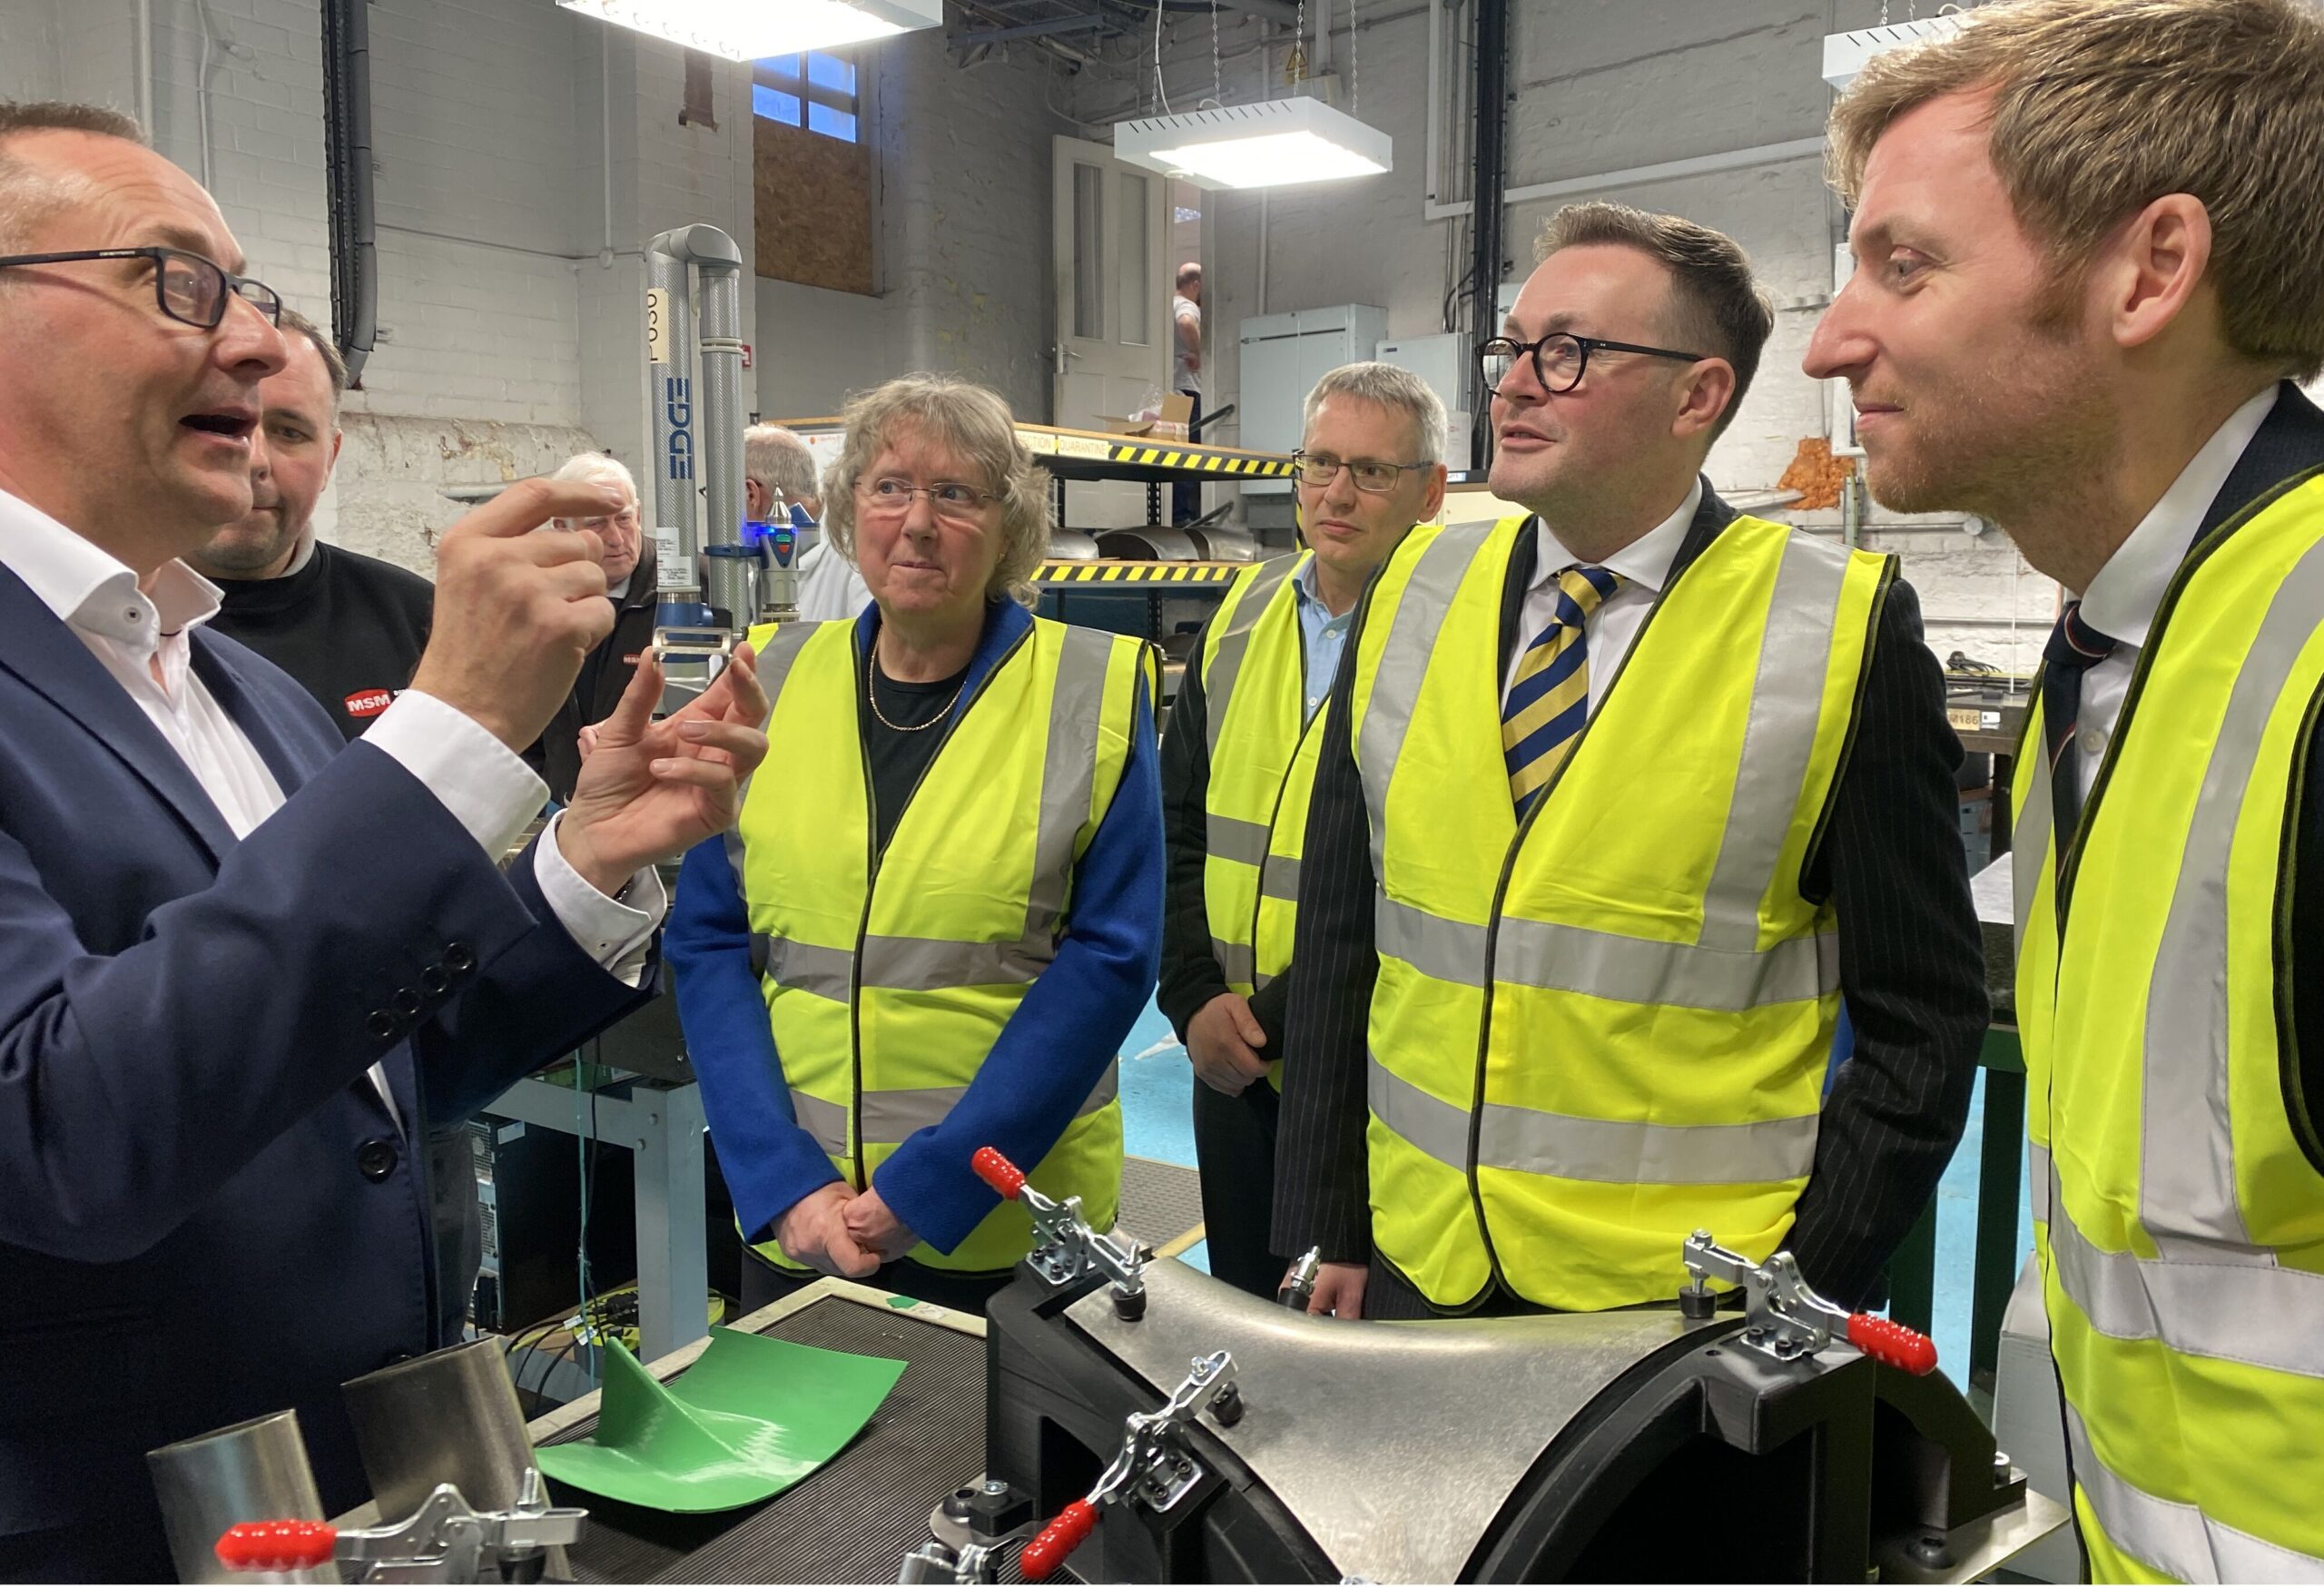 Minister for Industry visits aerospace manufacturer to see the impact of Made Smarter adoption programme